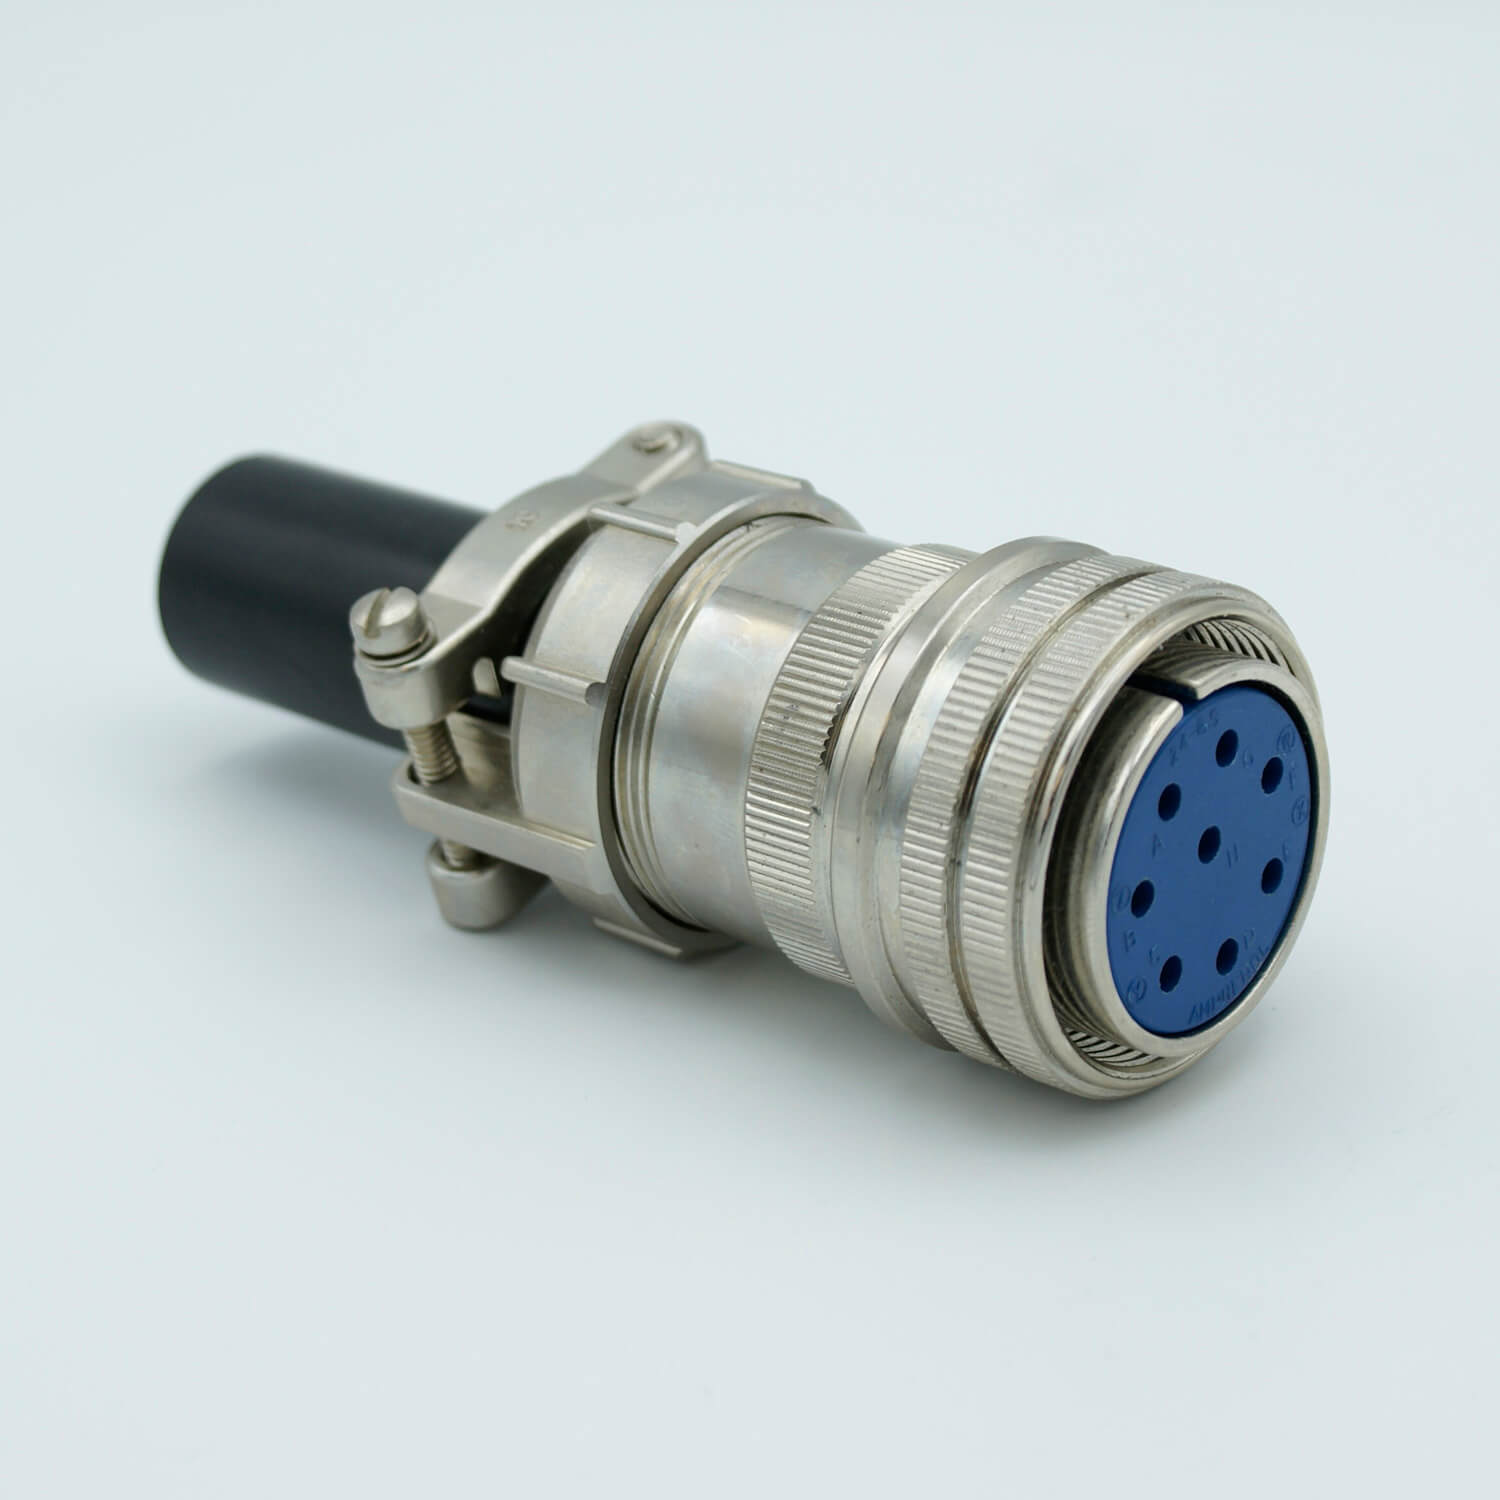 Ms Series Air Side Connector 8 Pins 700 Volts 23 Amps Per Pin Accepts 0 092 Or 0 094 Dia